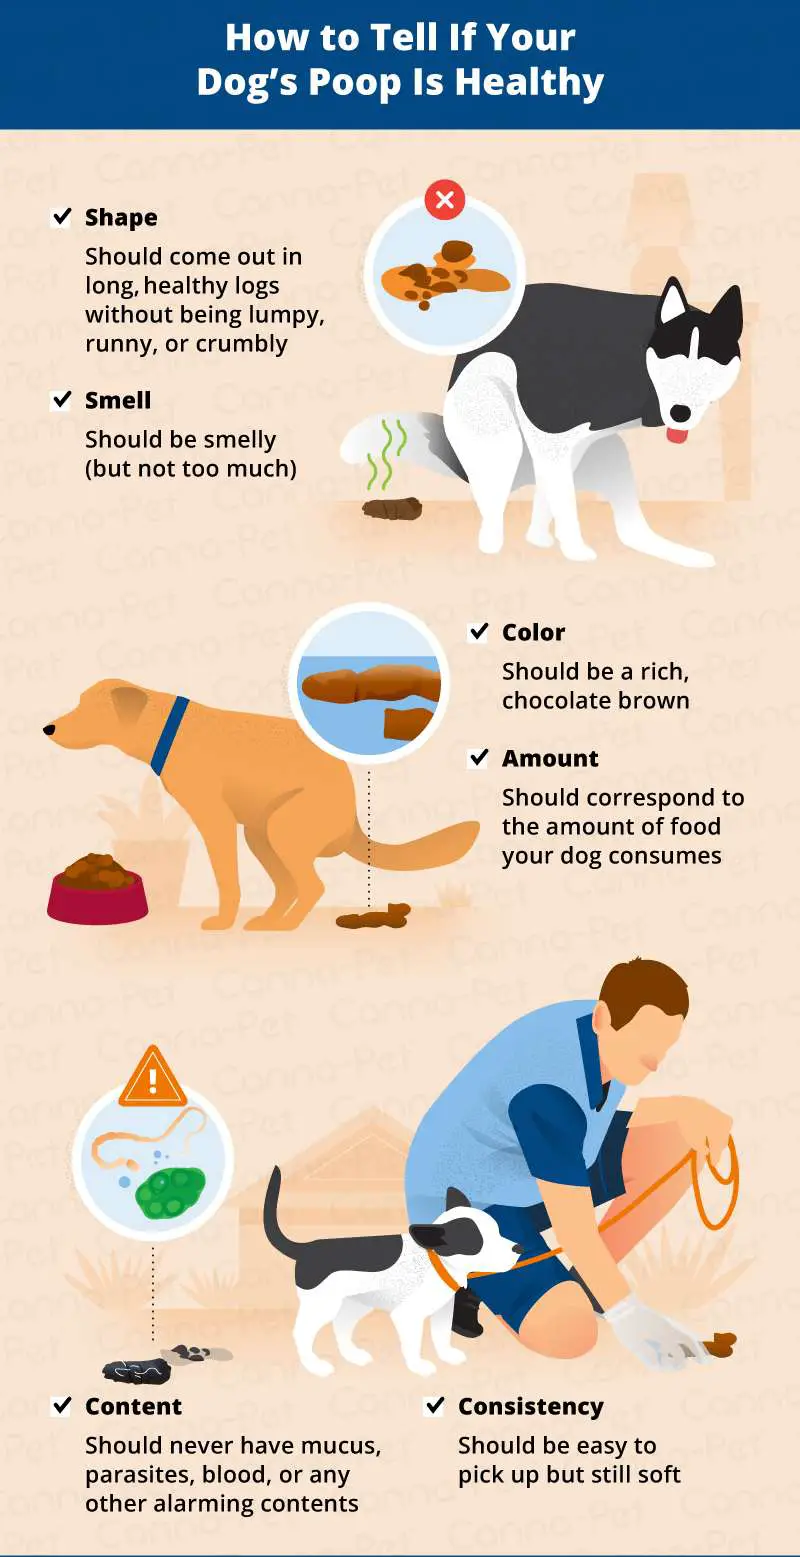 What to Do If Your Dog